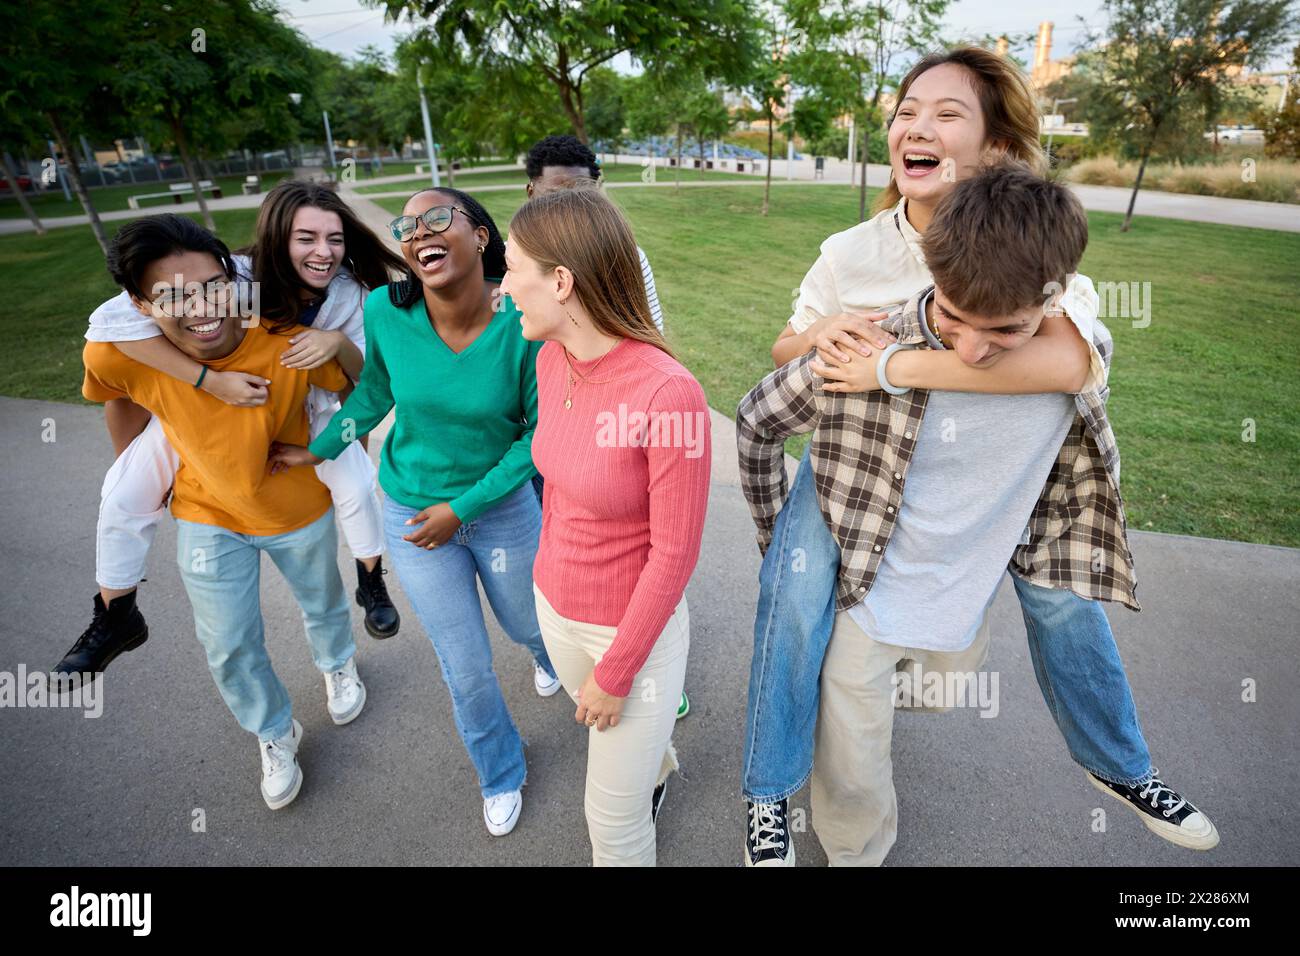 A large multiracial group of teenagers laughing and having fun piggybacking together Stock Photo